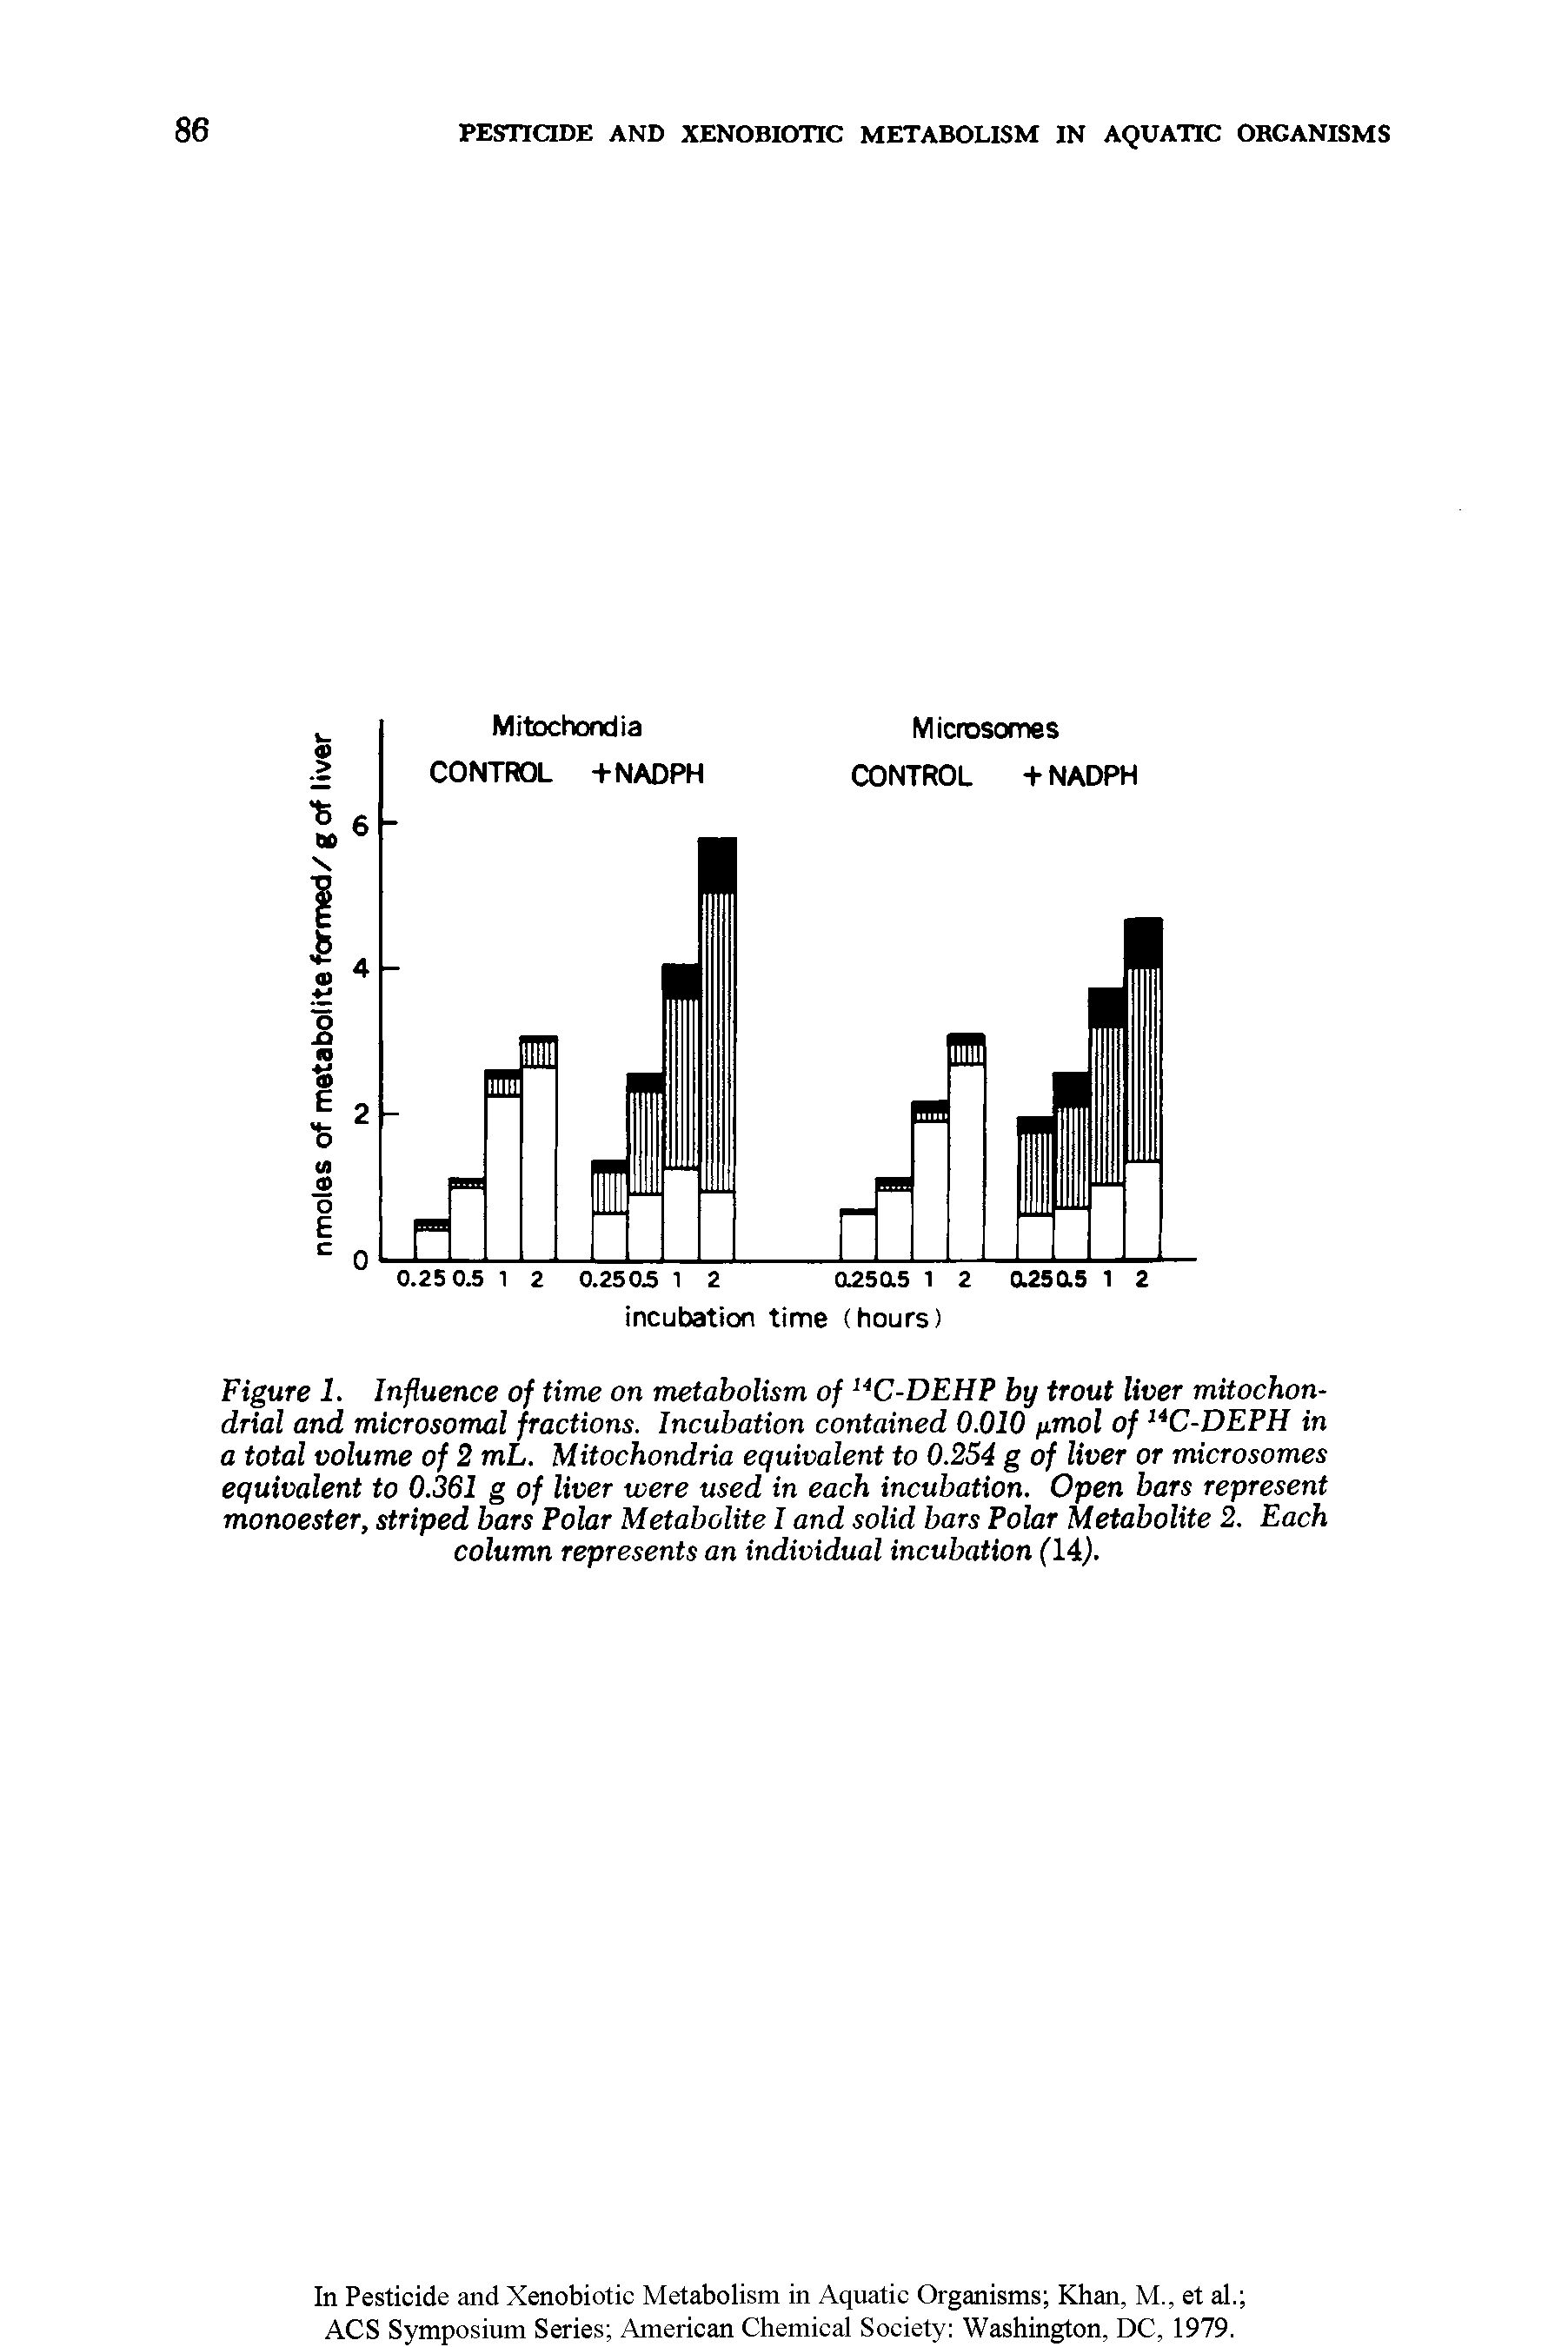 Figure 1. Influence of time on metabolism of I4C-DEHP by trout liver mitochondrial and microsomal fractions. Incubation contained 0.010 /imol of 14C-DEPH in a total volume of 2 mL. Mitochondria equivalent to 0.254 g of liver or microsomes equivalent to 0.361 g of liver were used in each incubation. Open bars represent monoester, striped bars Polar Metabolite I and solid bars Polar Metabolite 2. Each column represents an individual incubation (14).